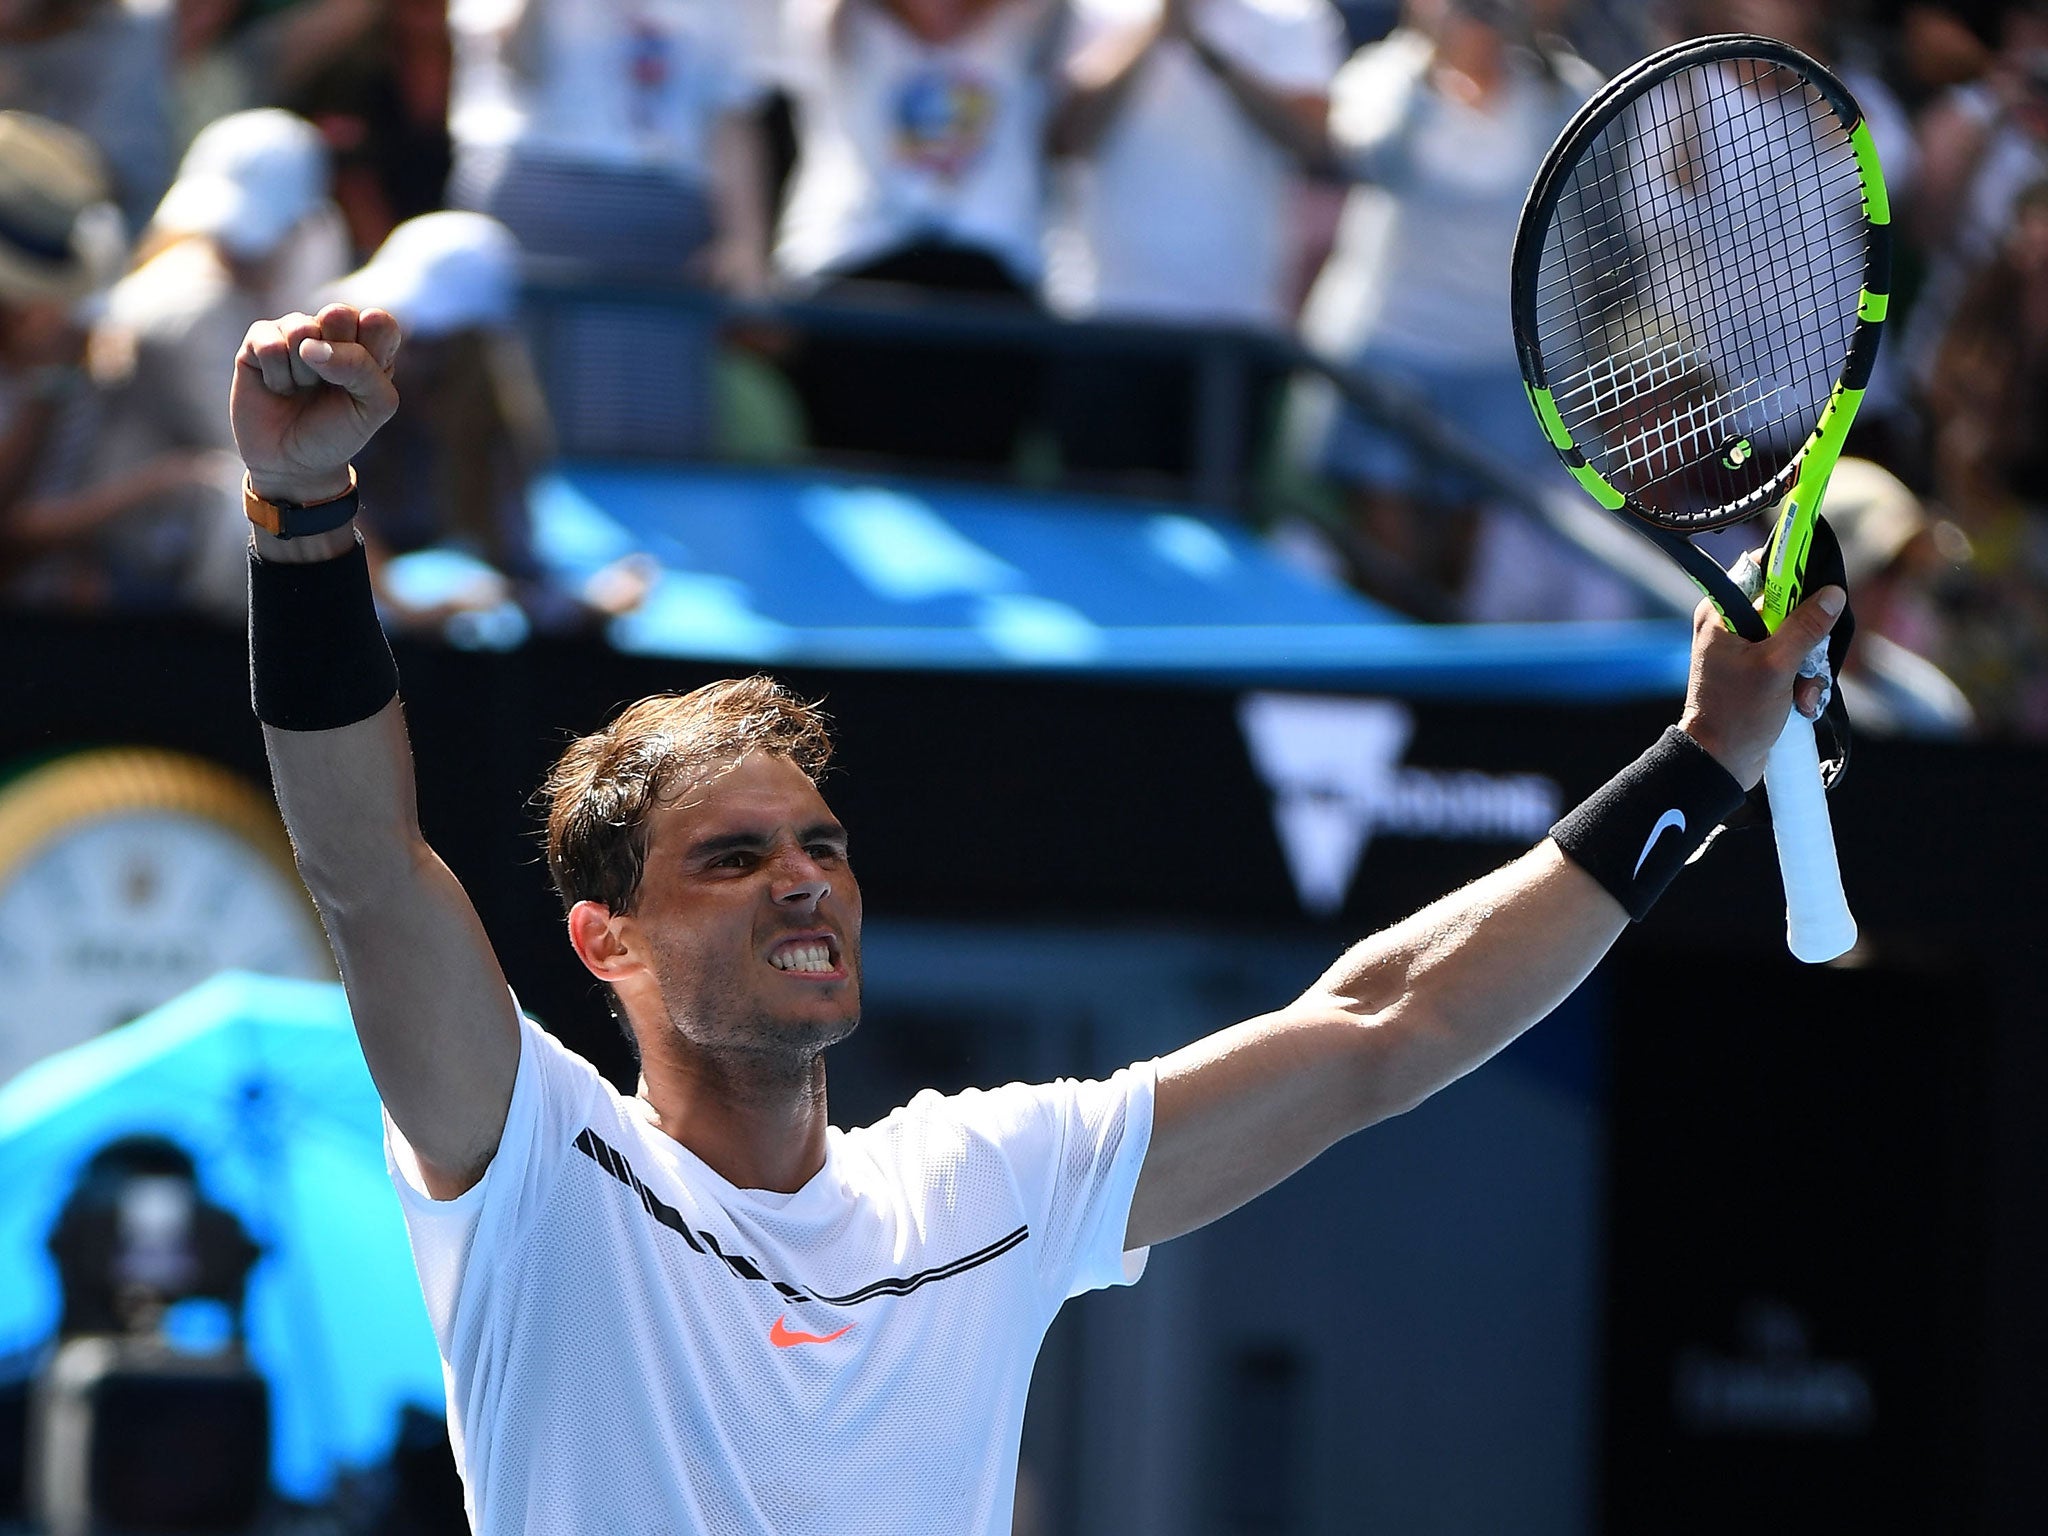 Rafael Nadal celebrates his straight-sets victory over Florian Mayer in the Australian Open first round